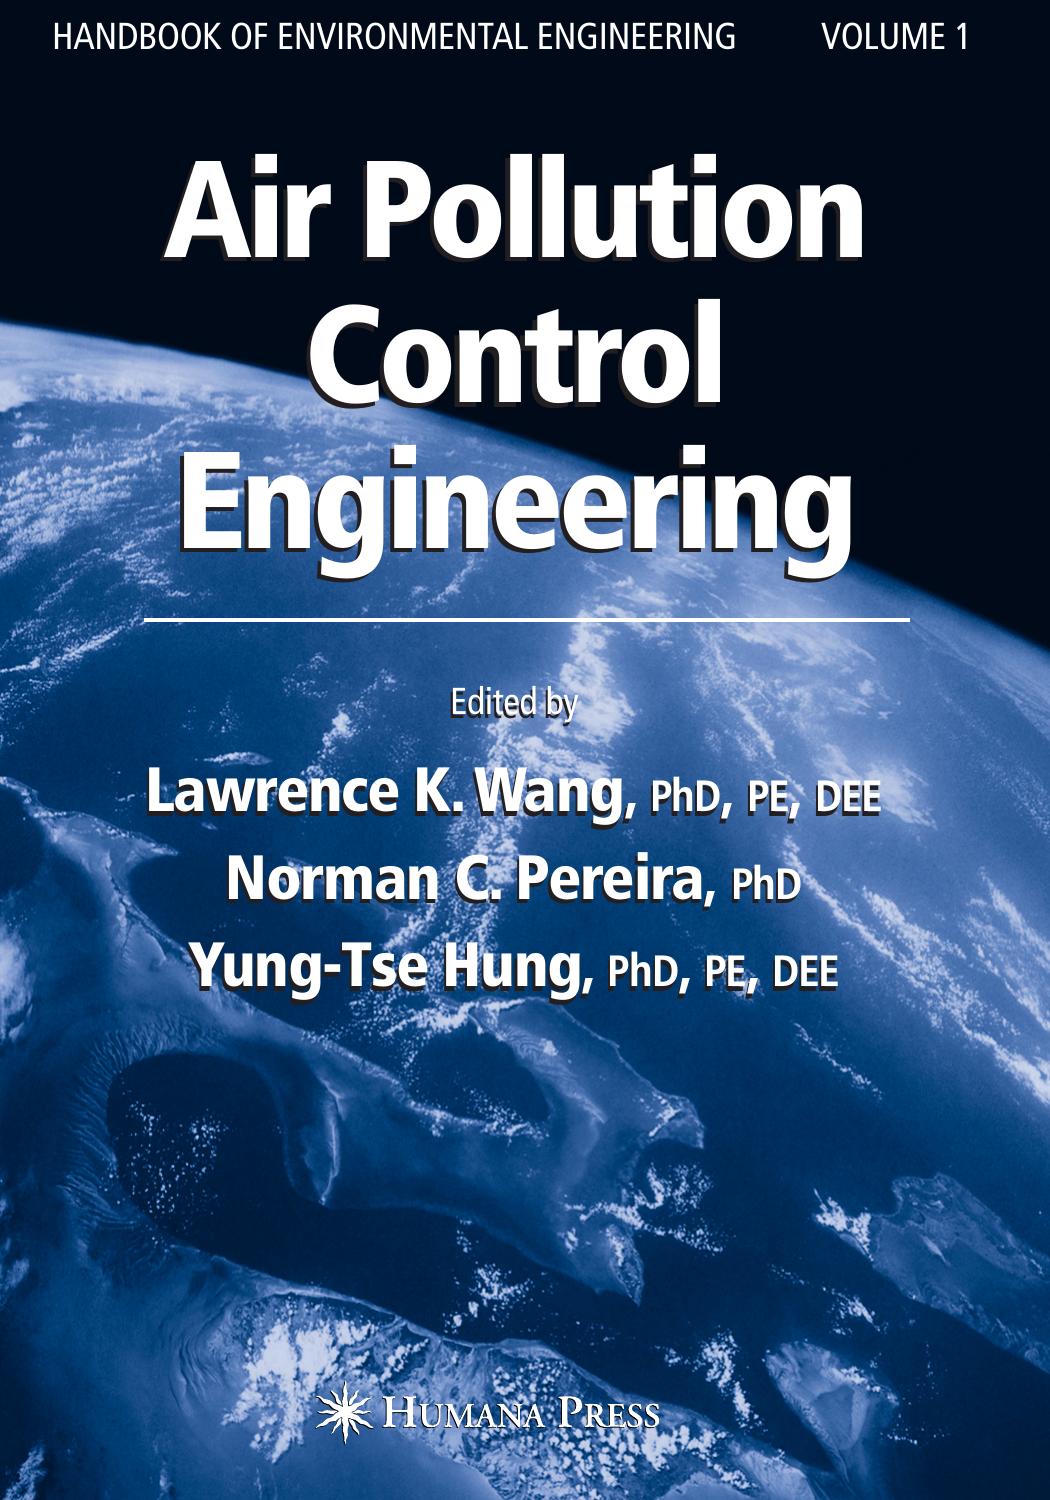 Air Pollution Control Engineering 2009